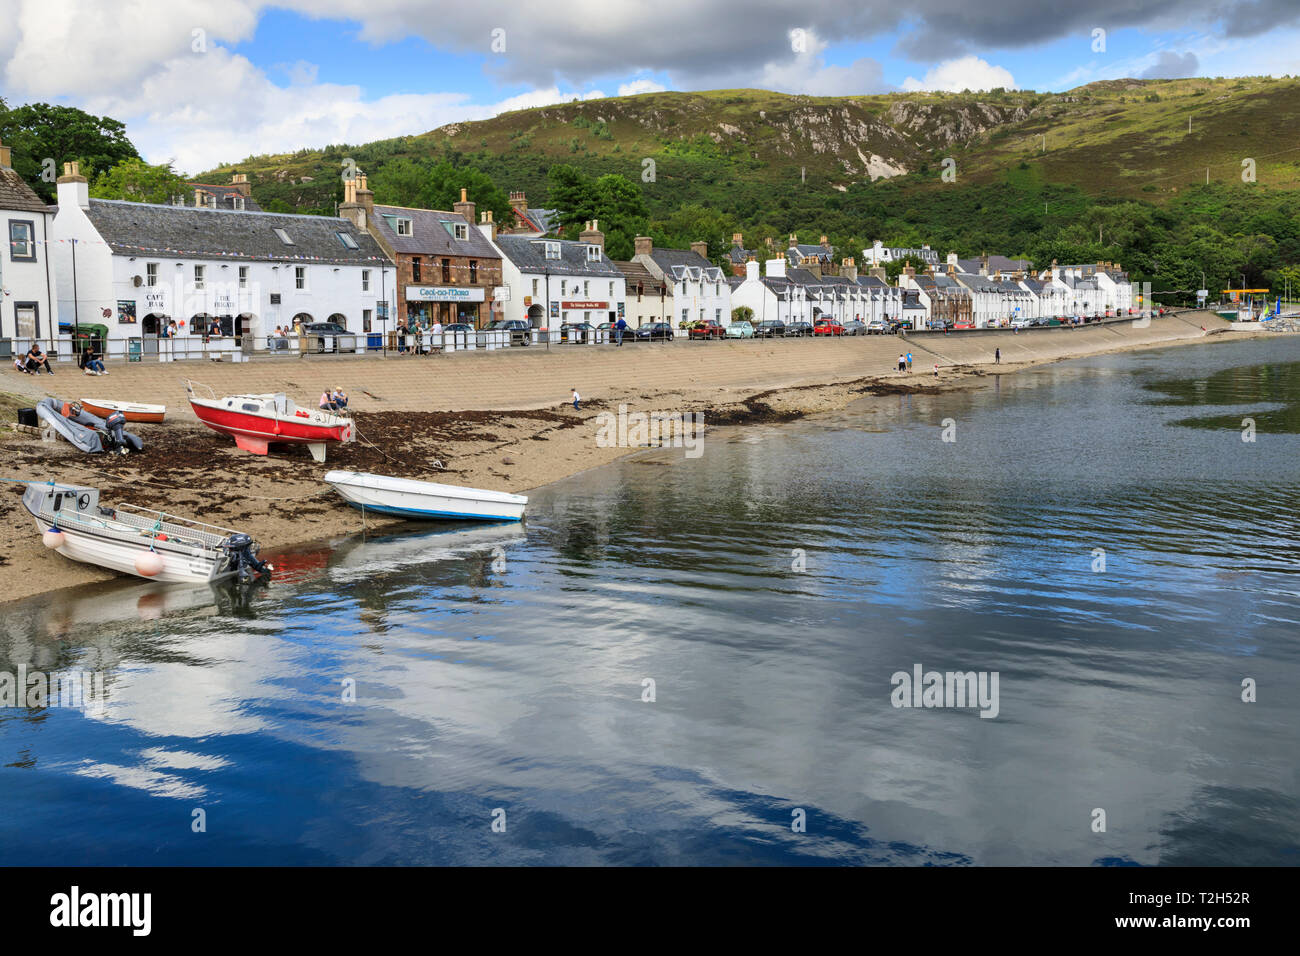 Cottages and boats by Loch Broom in Ullapool, Scotland, Europe Stock Photo